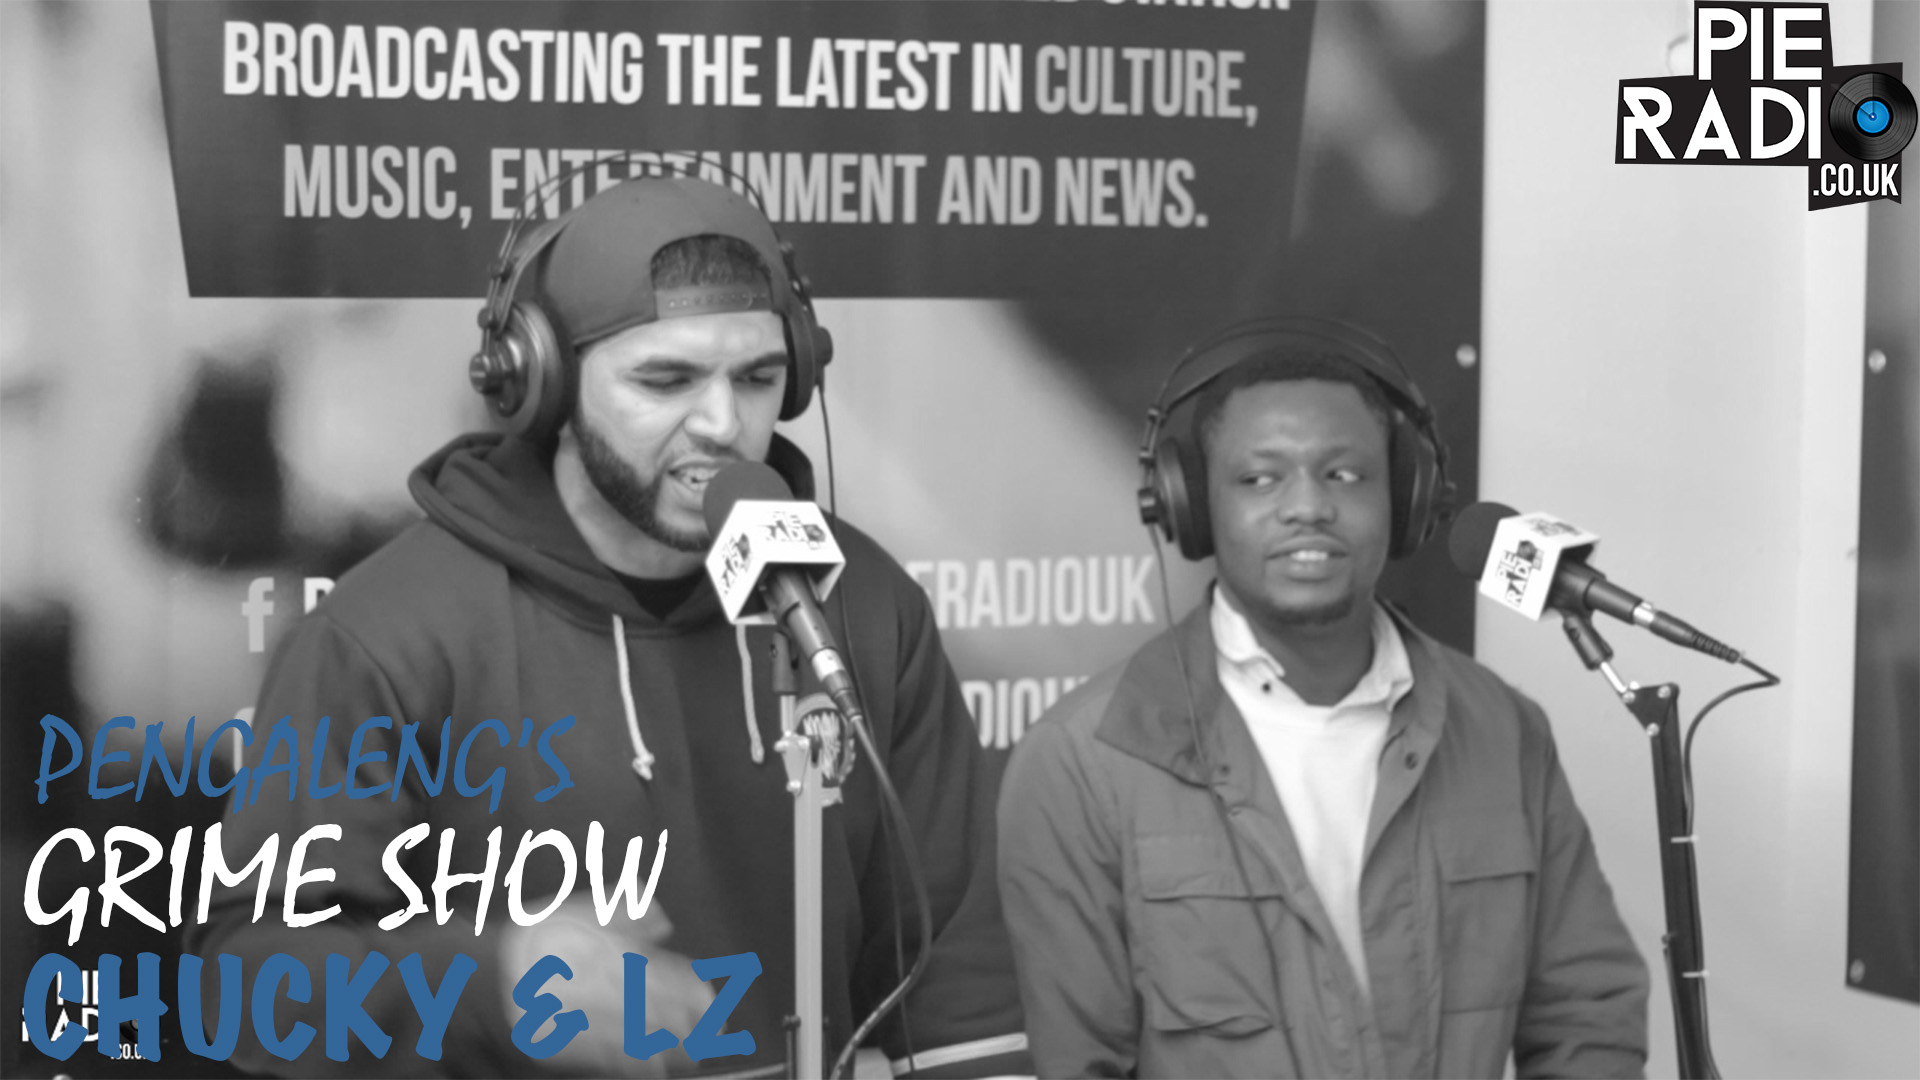 Chucky & LZonsite On Pengaleng’s Grime Show